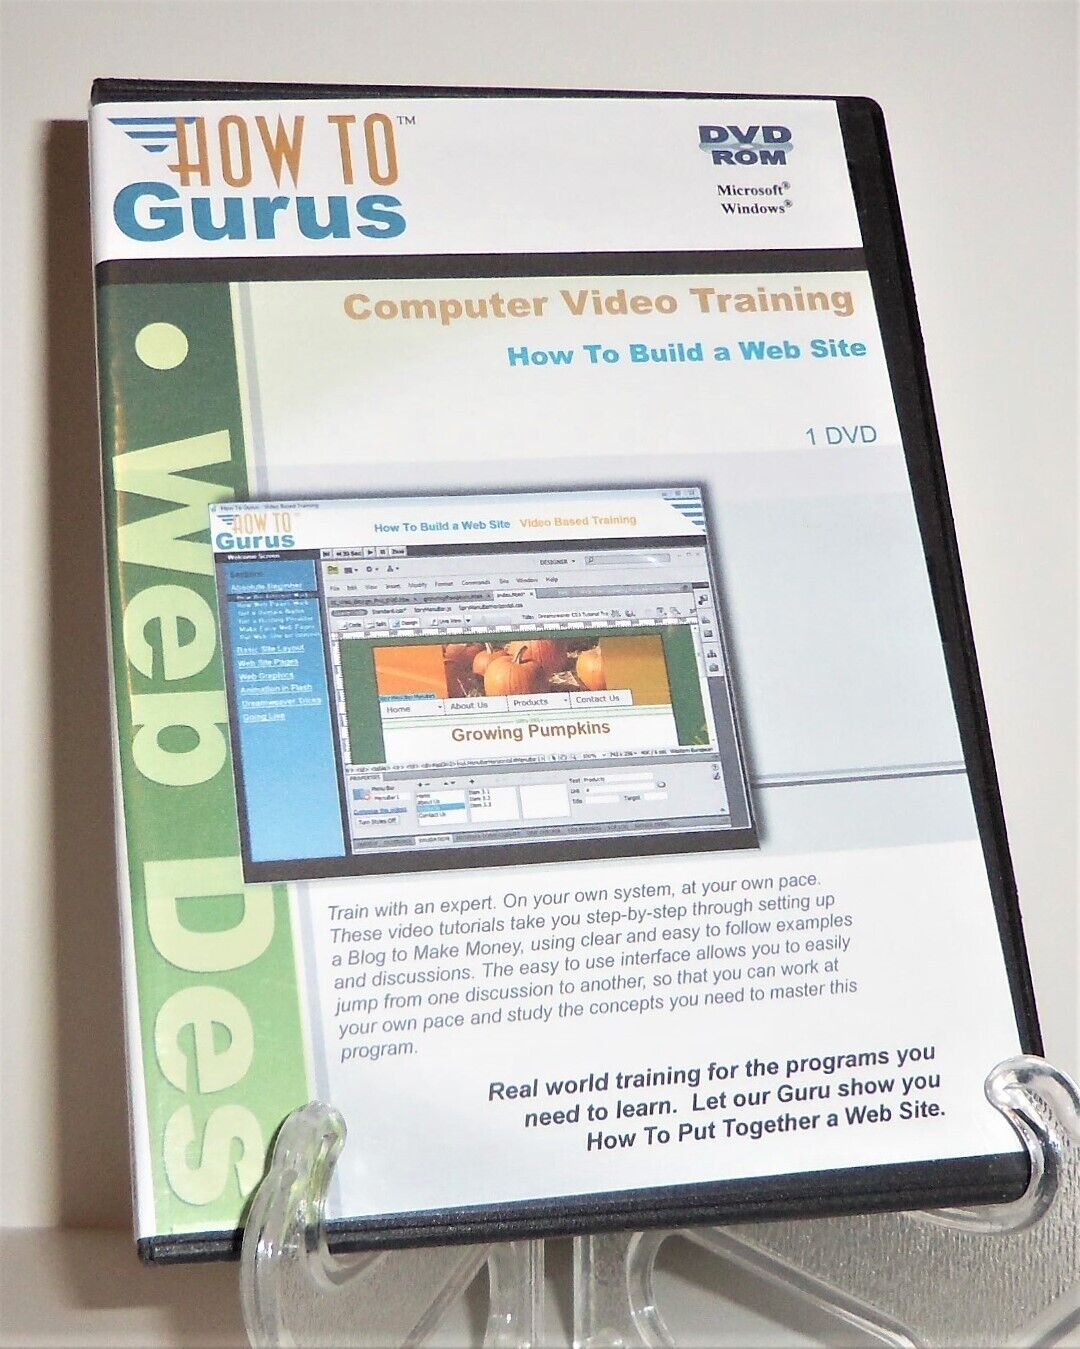 How To Gurus Video Training DVD ROM How To Build a Web Site